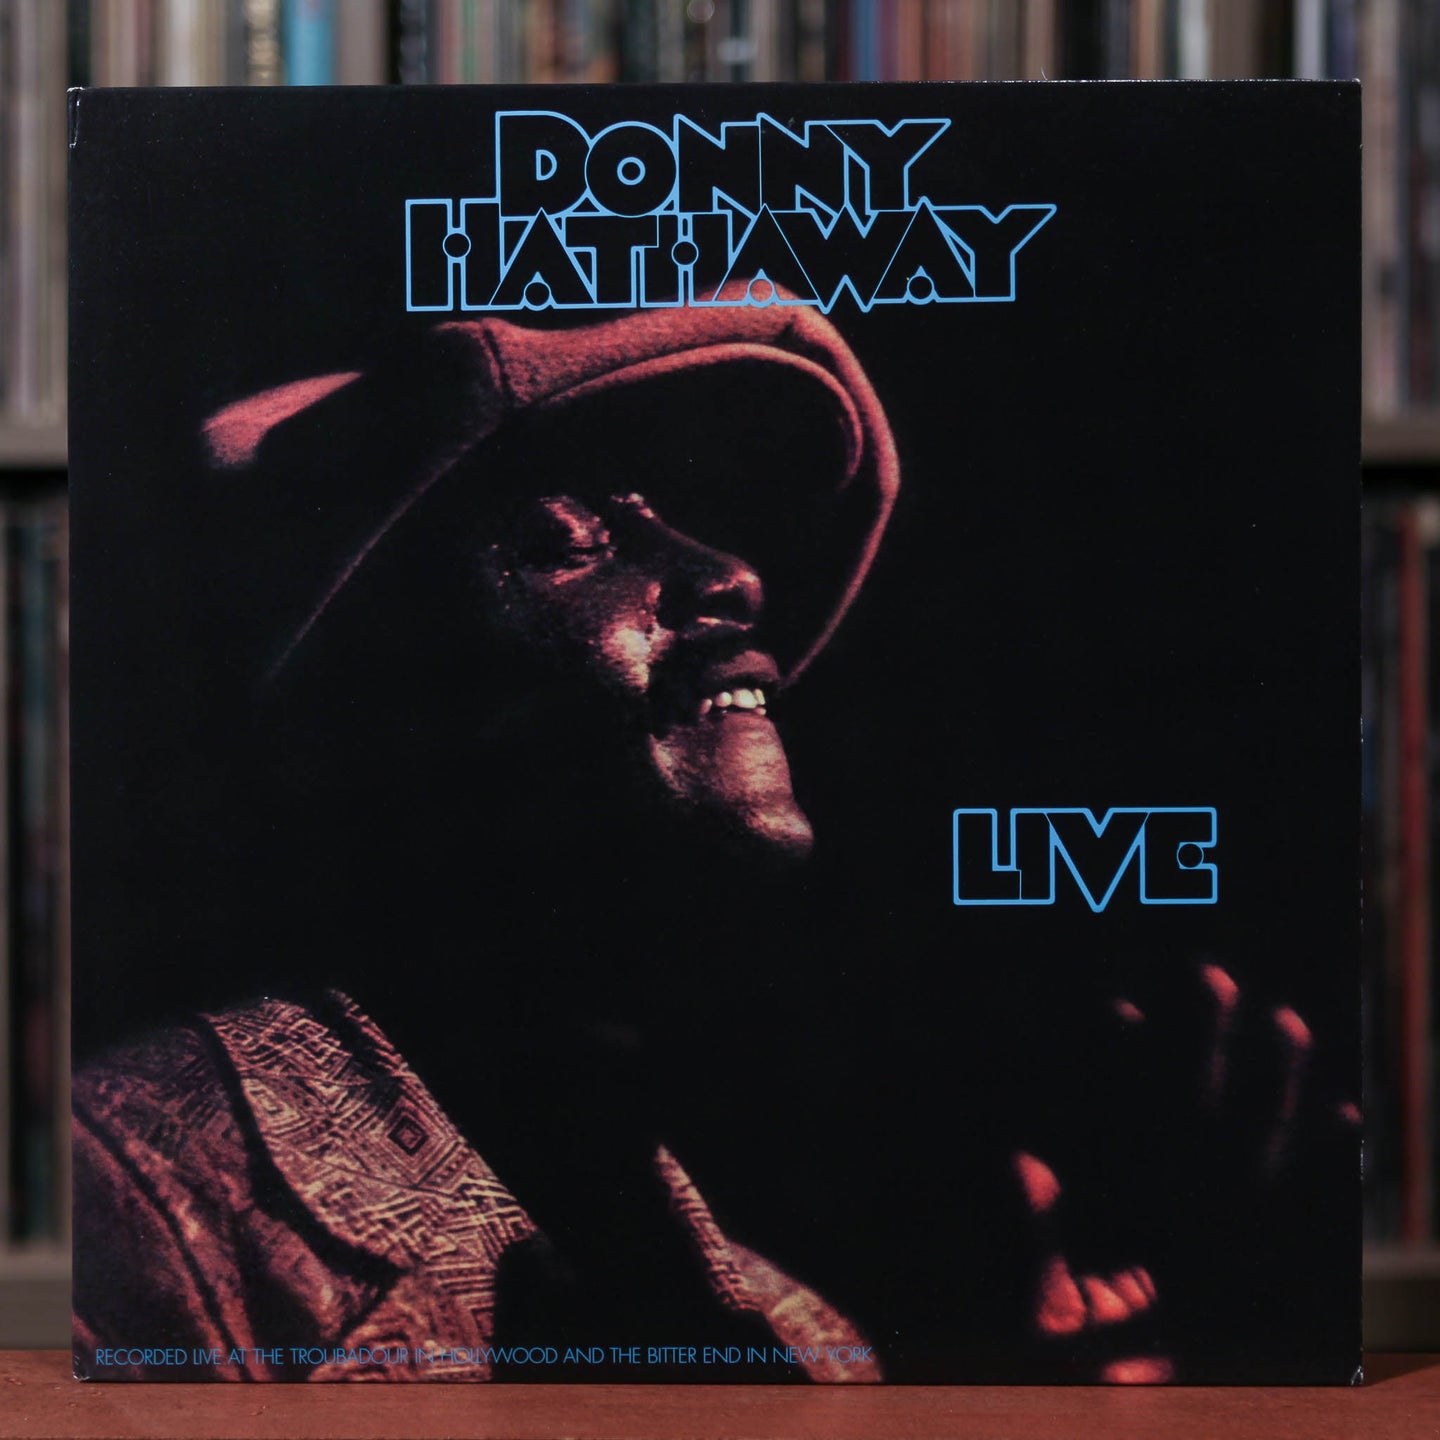 Donny Hathaway - Live - 2001 ATCO, EX/VG+